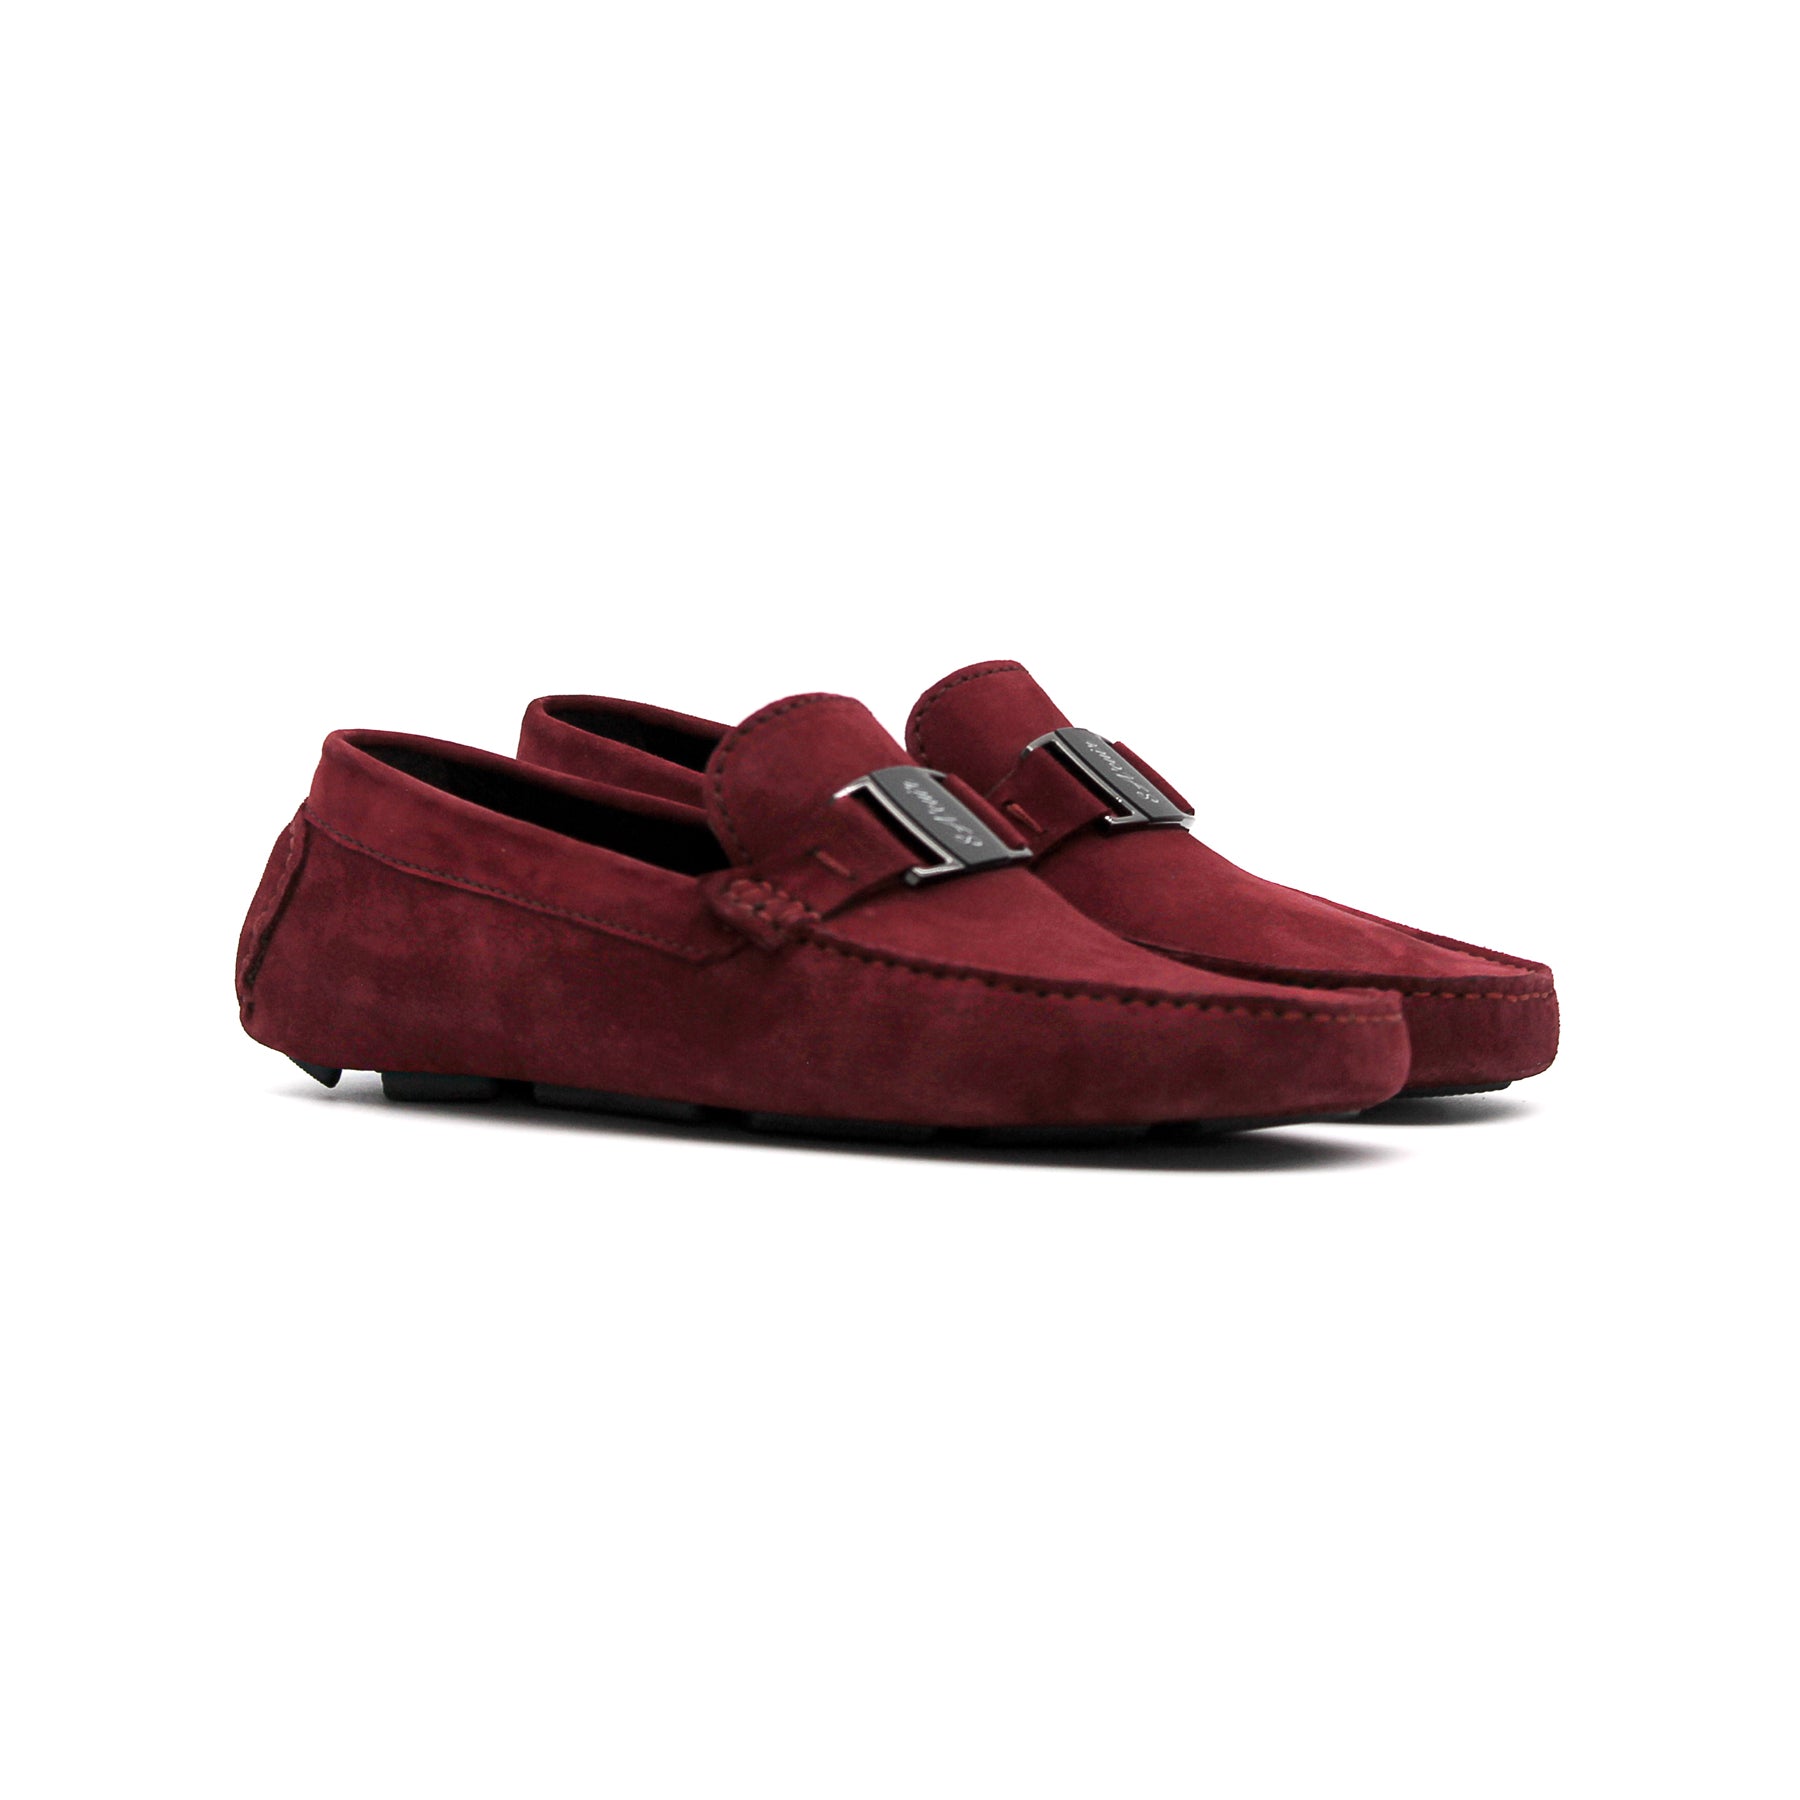 Suede Leather Loafer